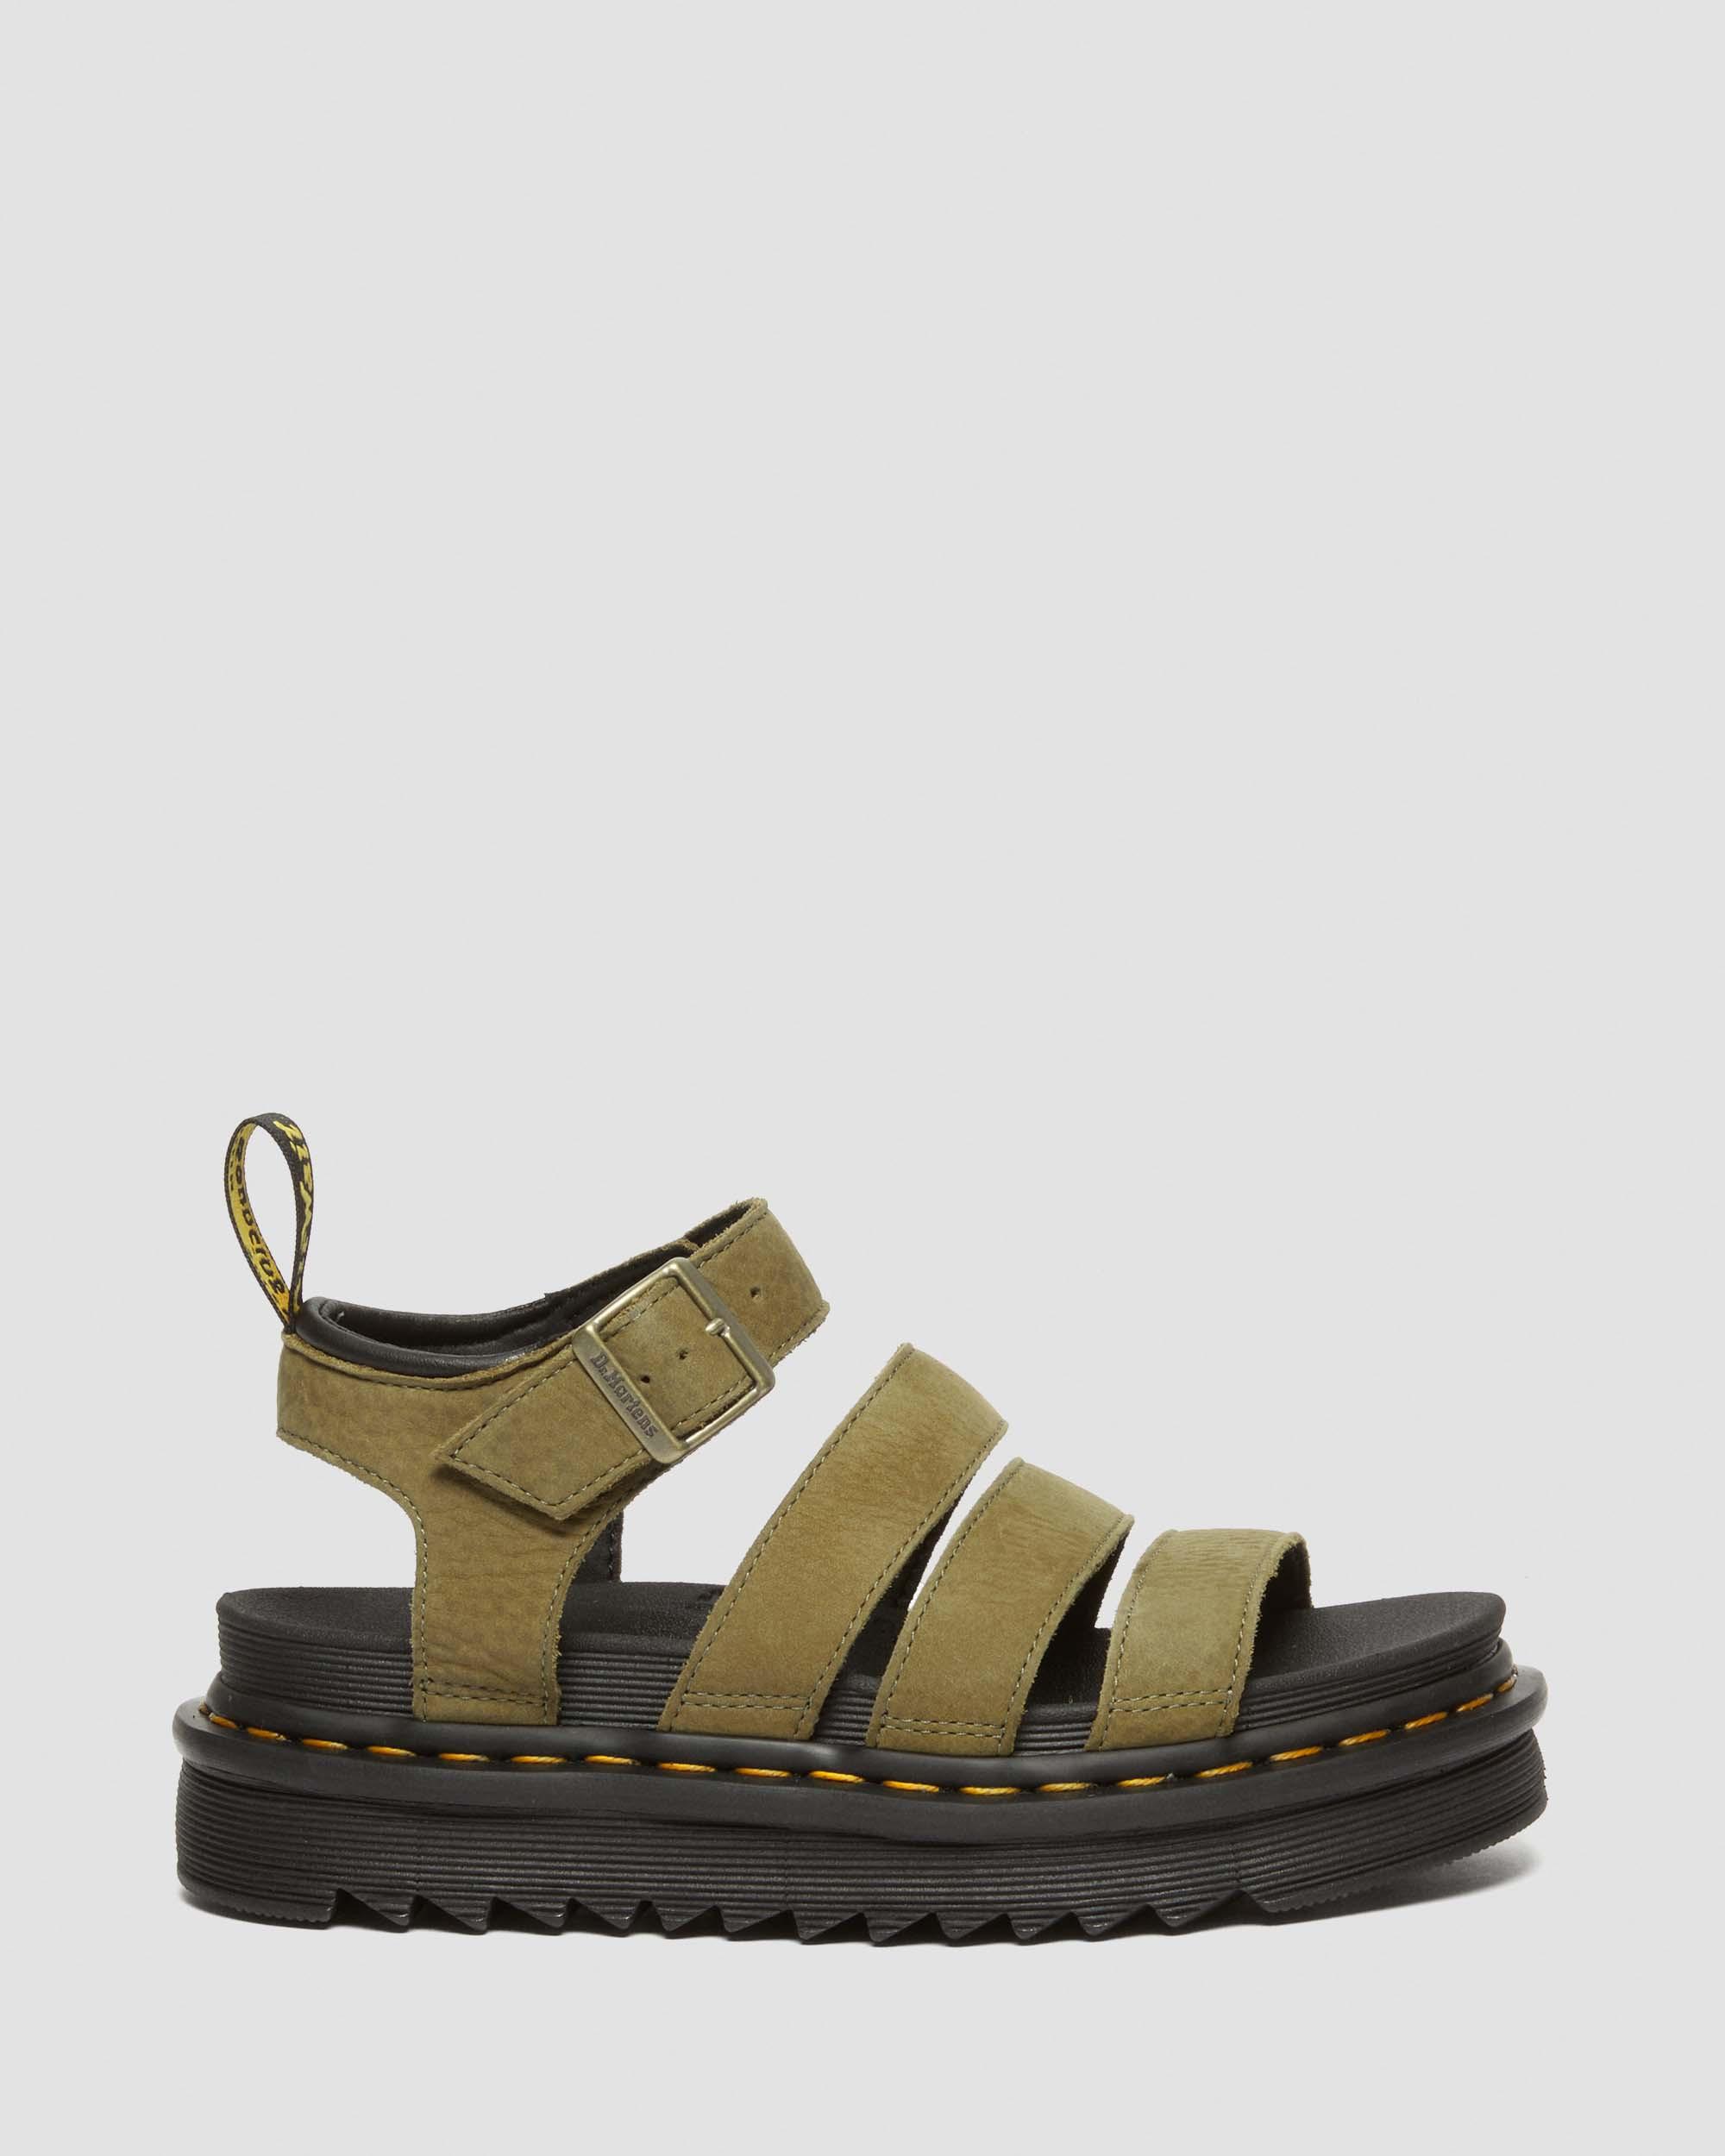 Blaire Tumbled Nubuck Leather Sandals in Muted Olive | Dr. Martens